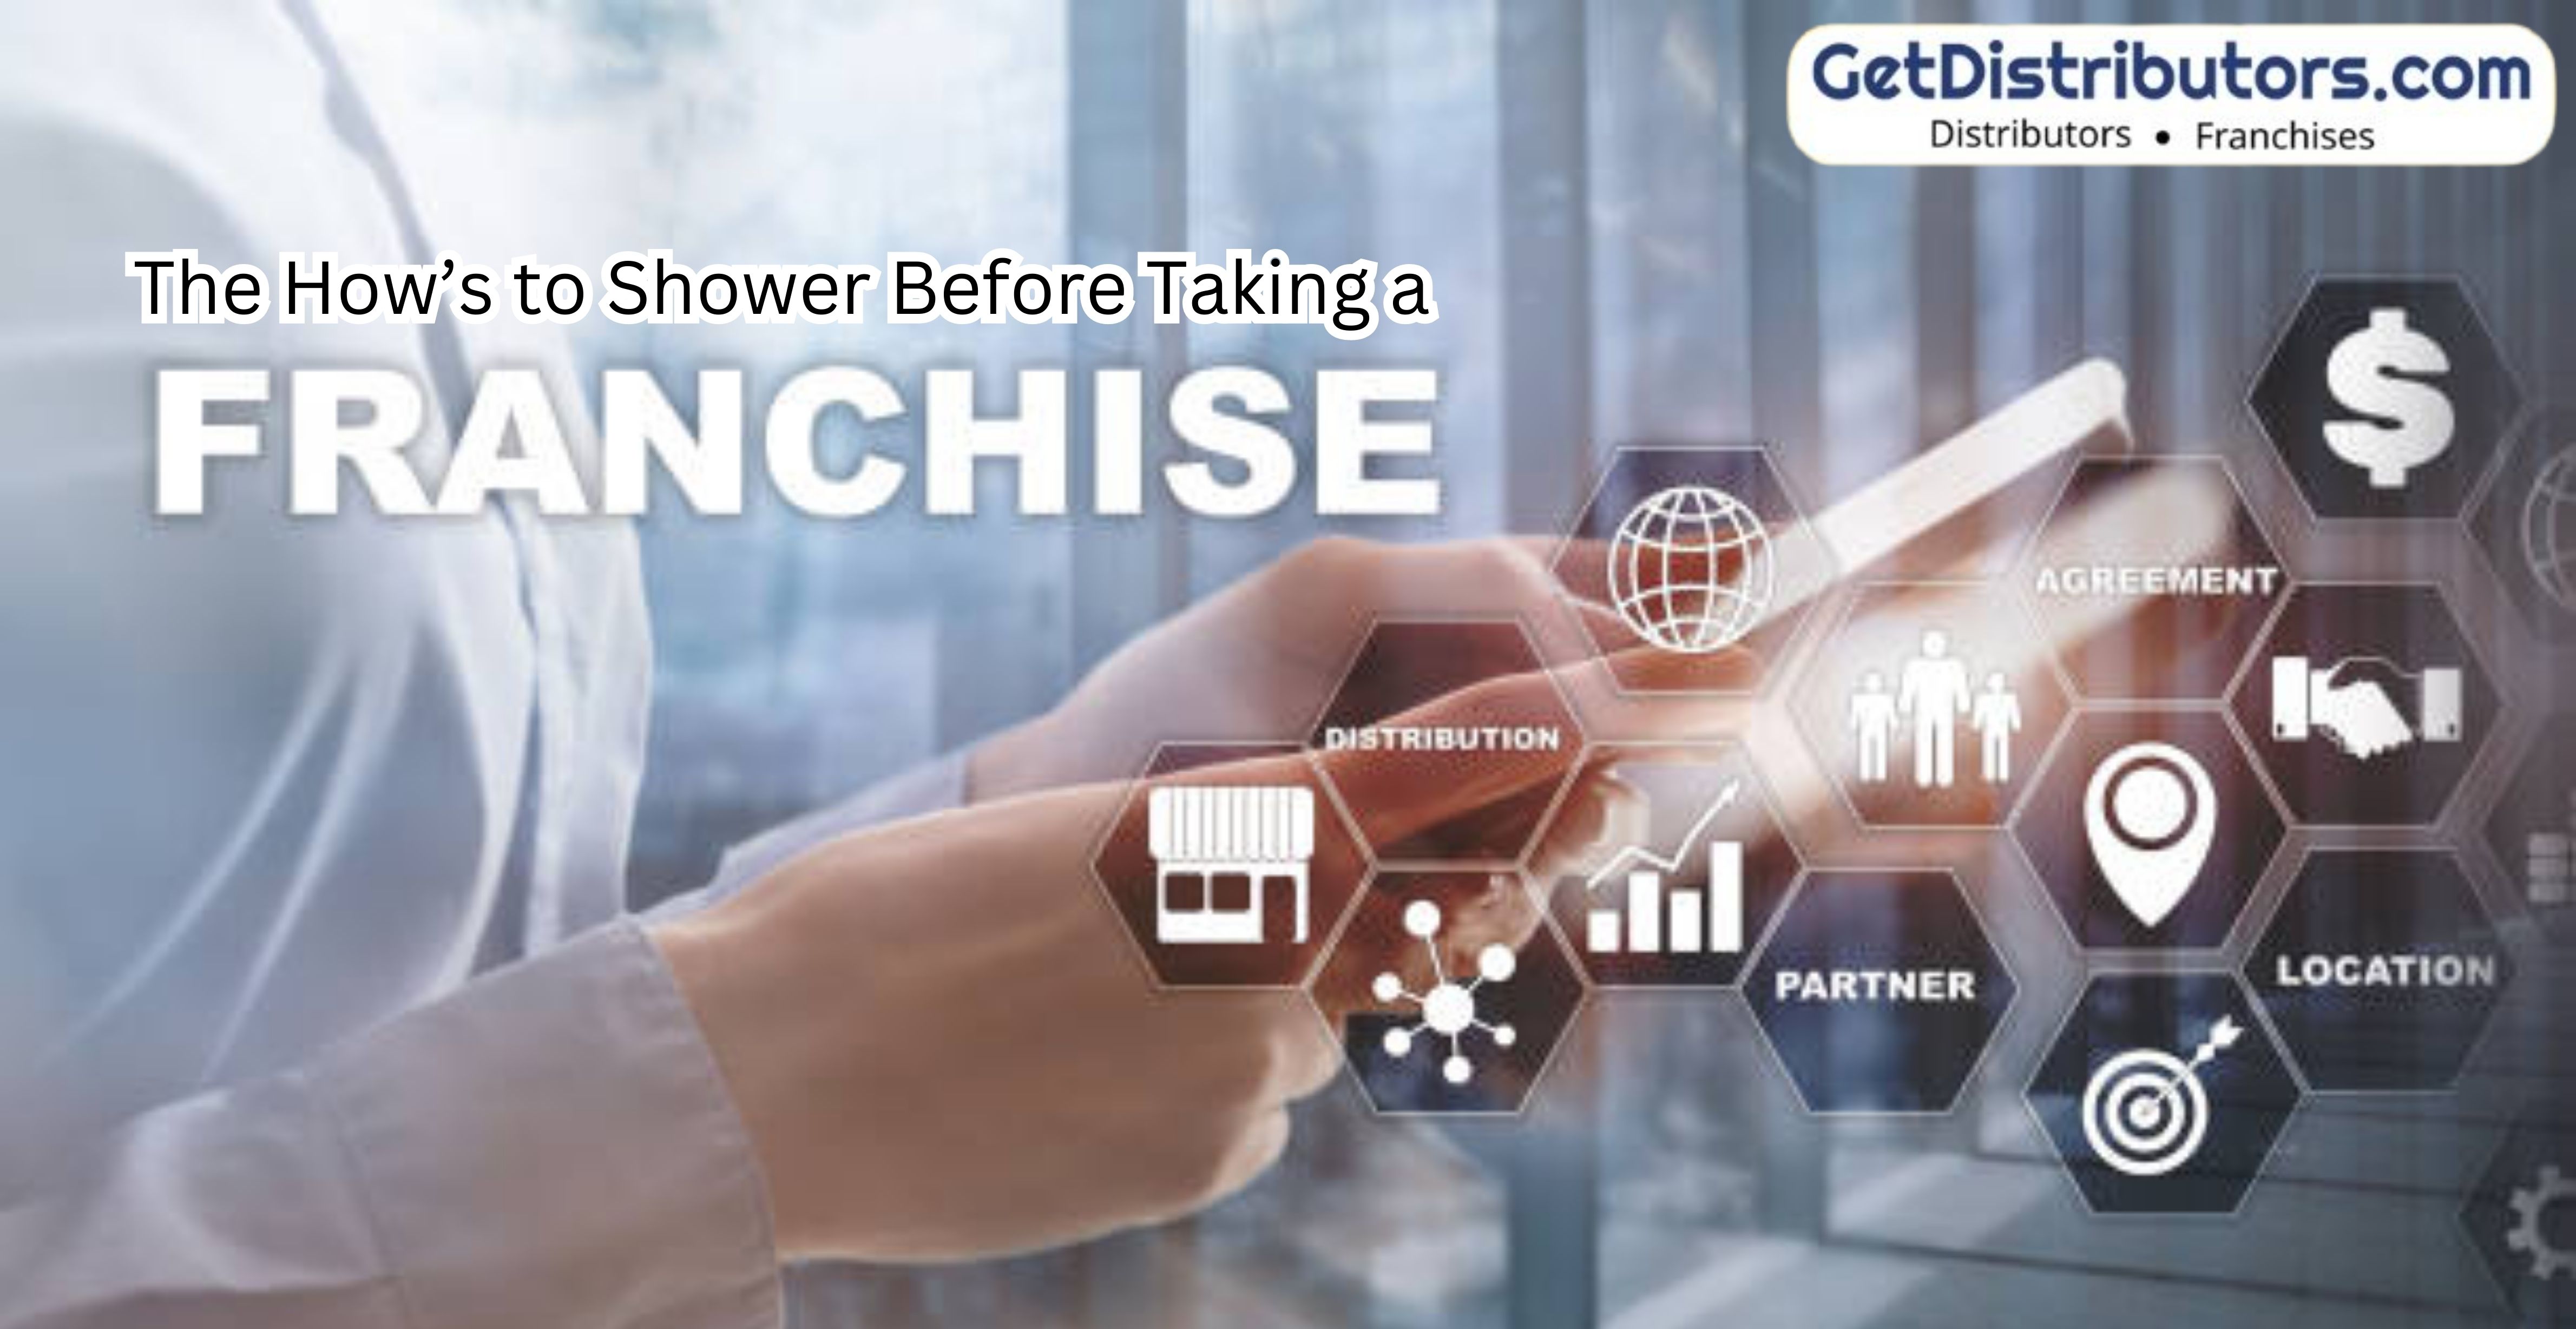 The How’s to Shower Before Taking a Franchise